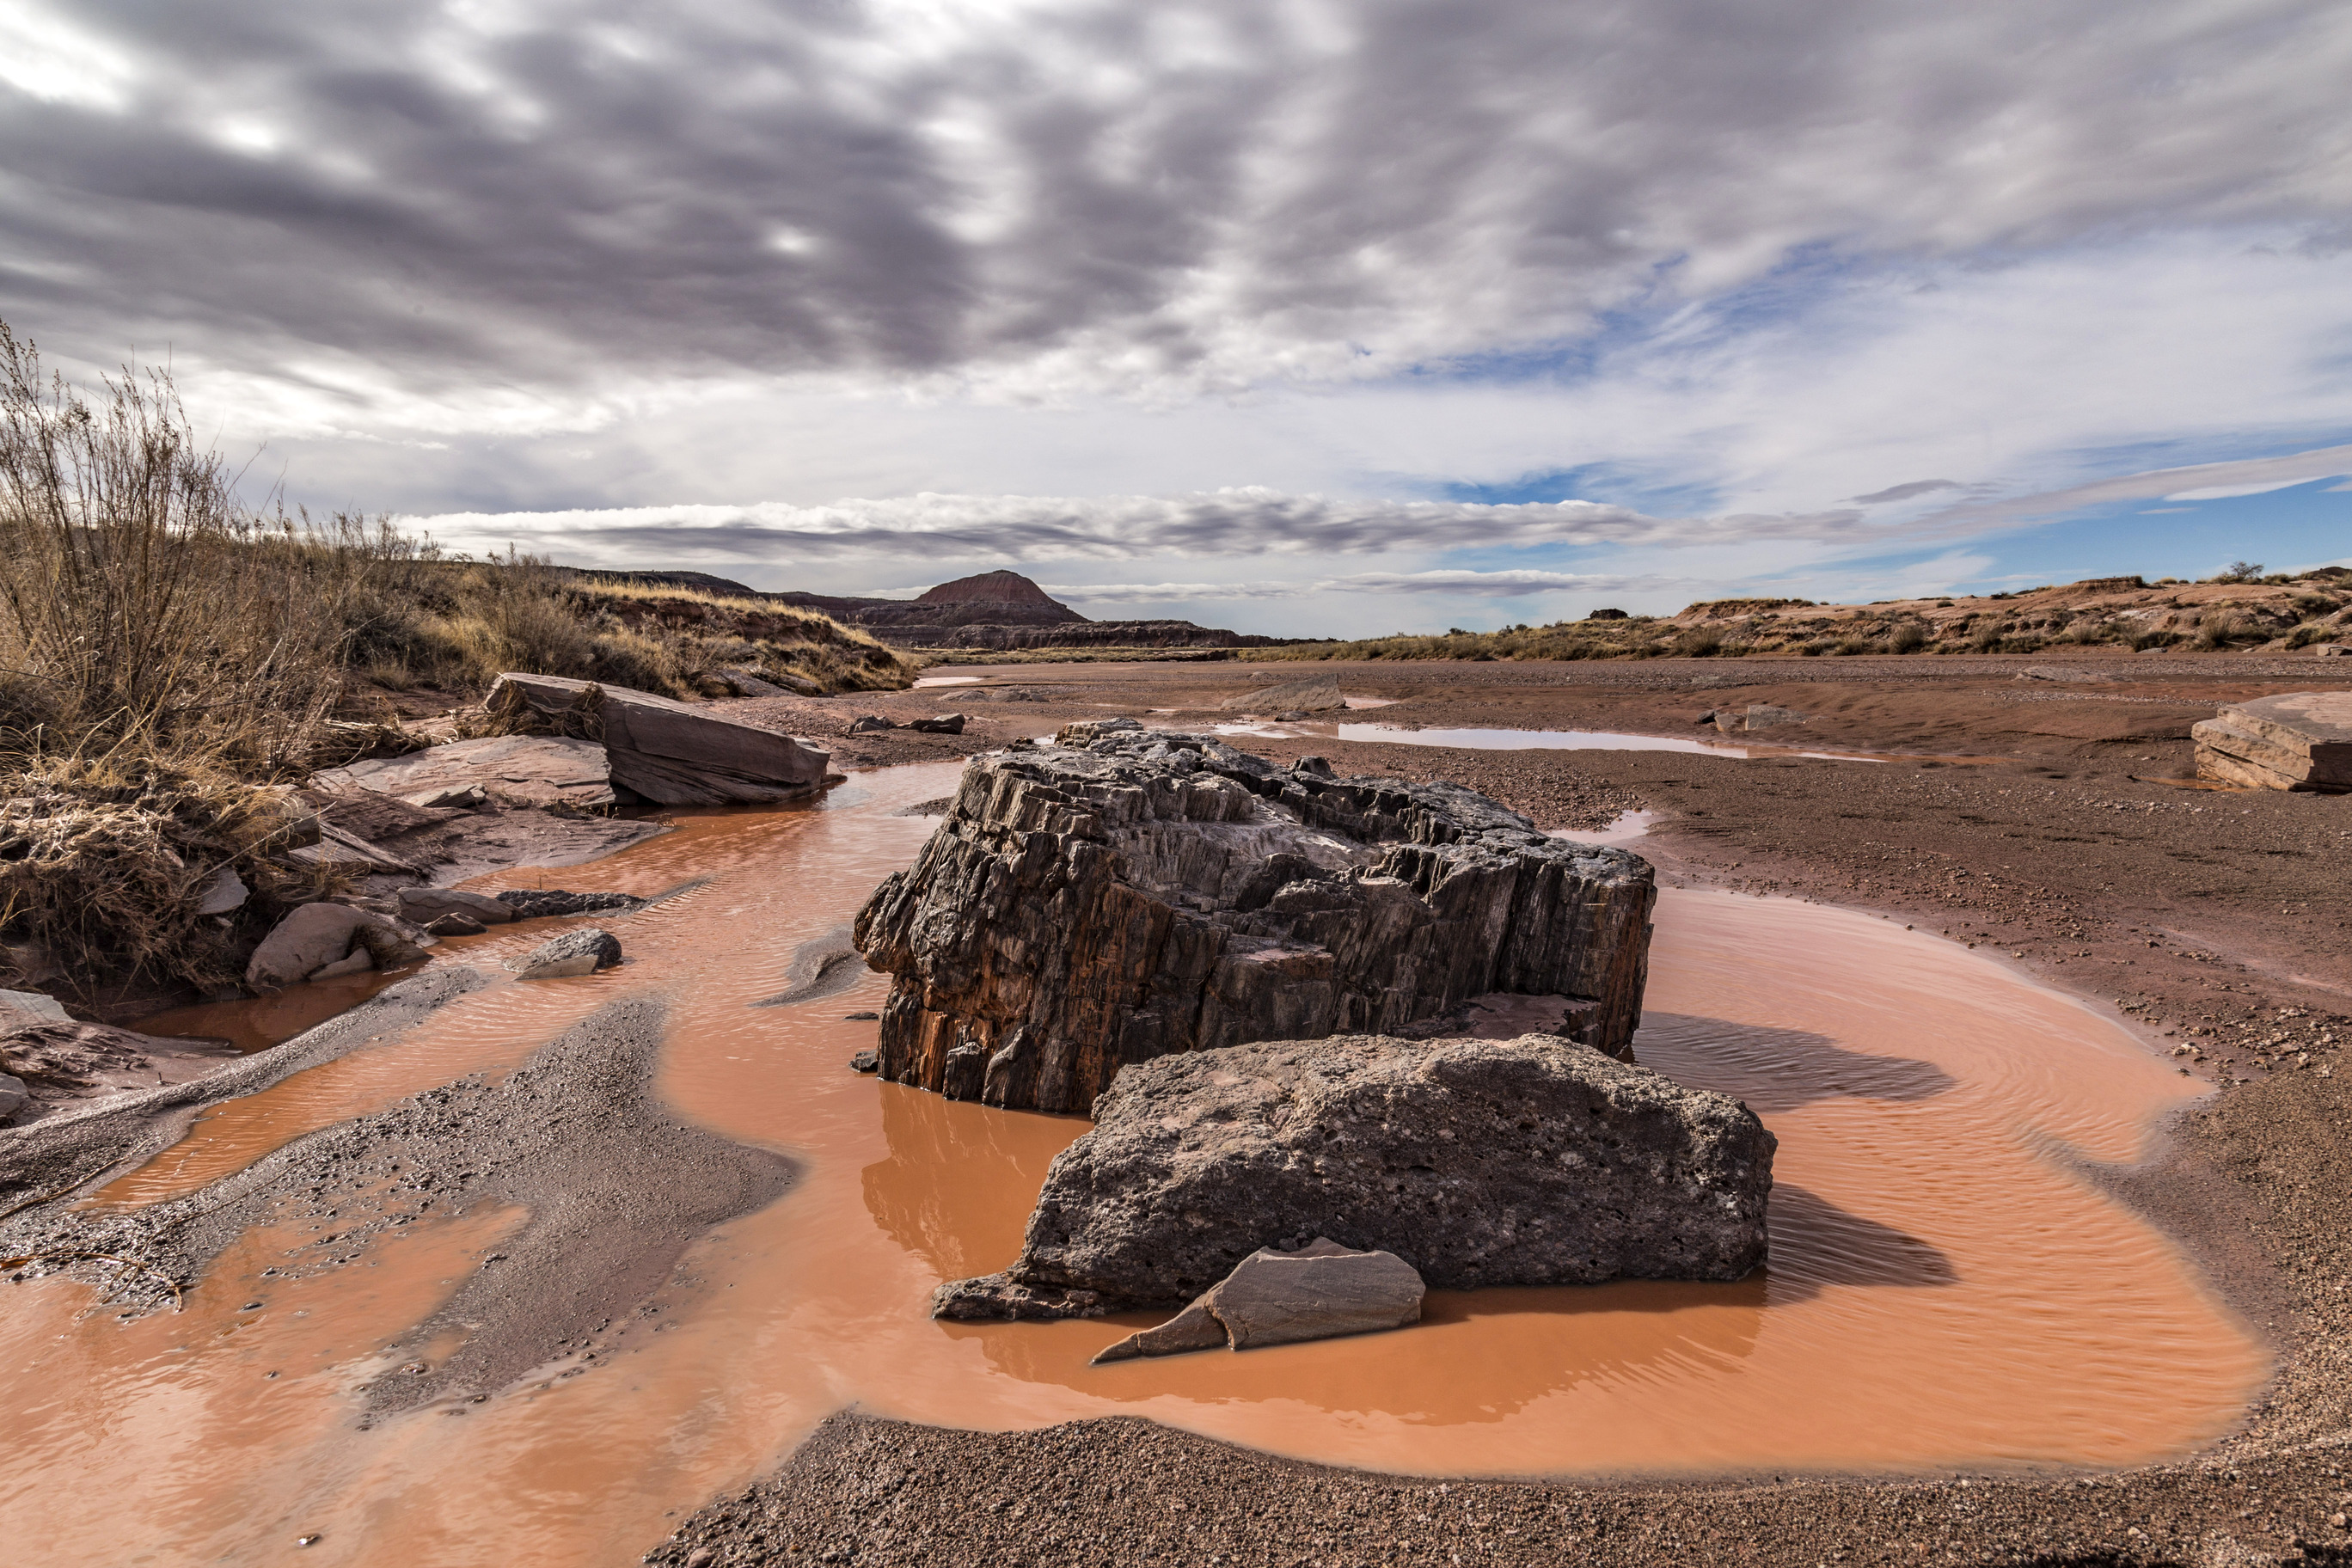 Petrified wood in a silty pool of water in red landscape